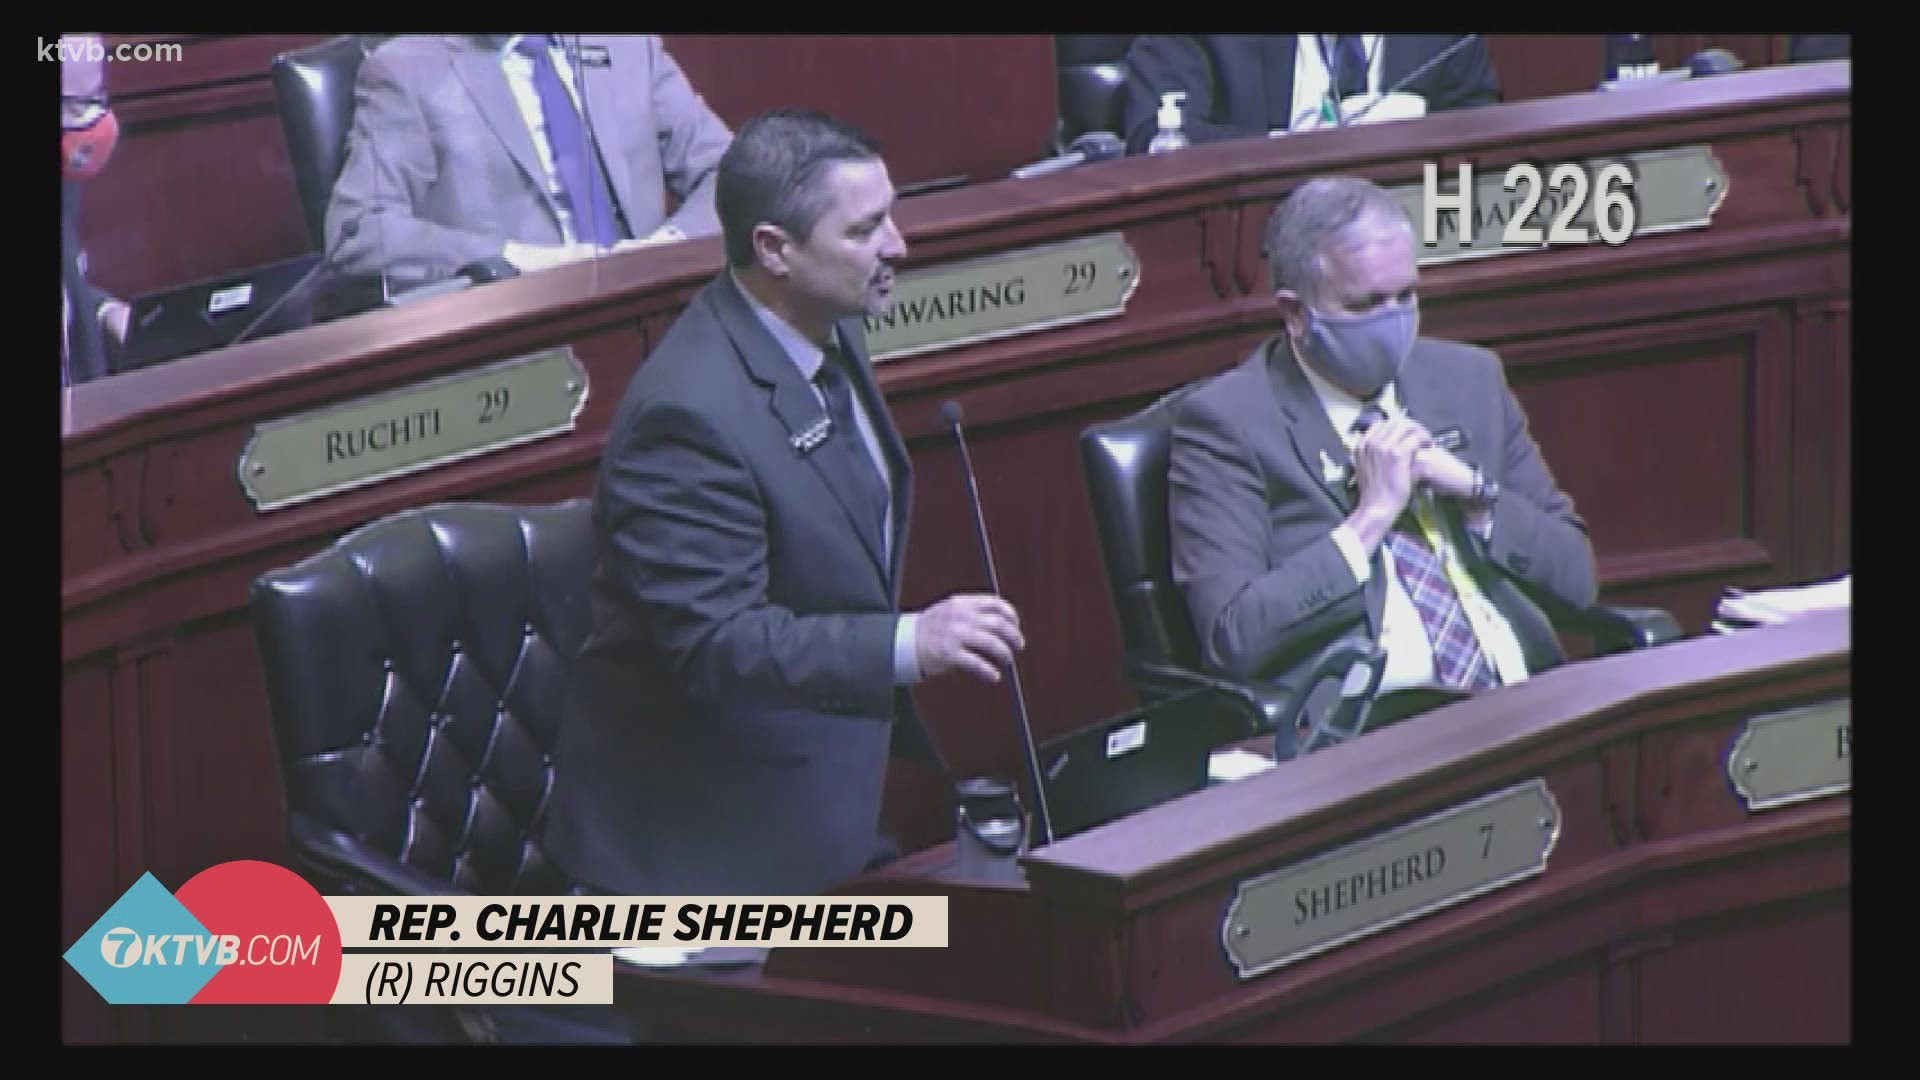 Rep. Shepherd thinks this chance to help kids get ready for kindergarten would do damage to the family unit.